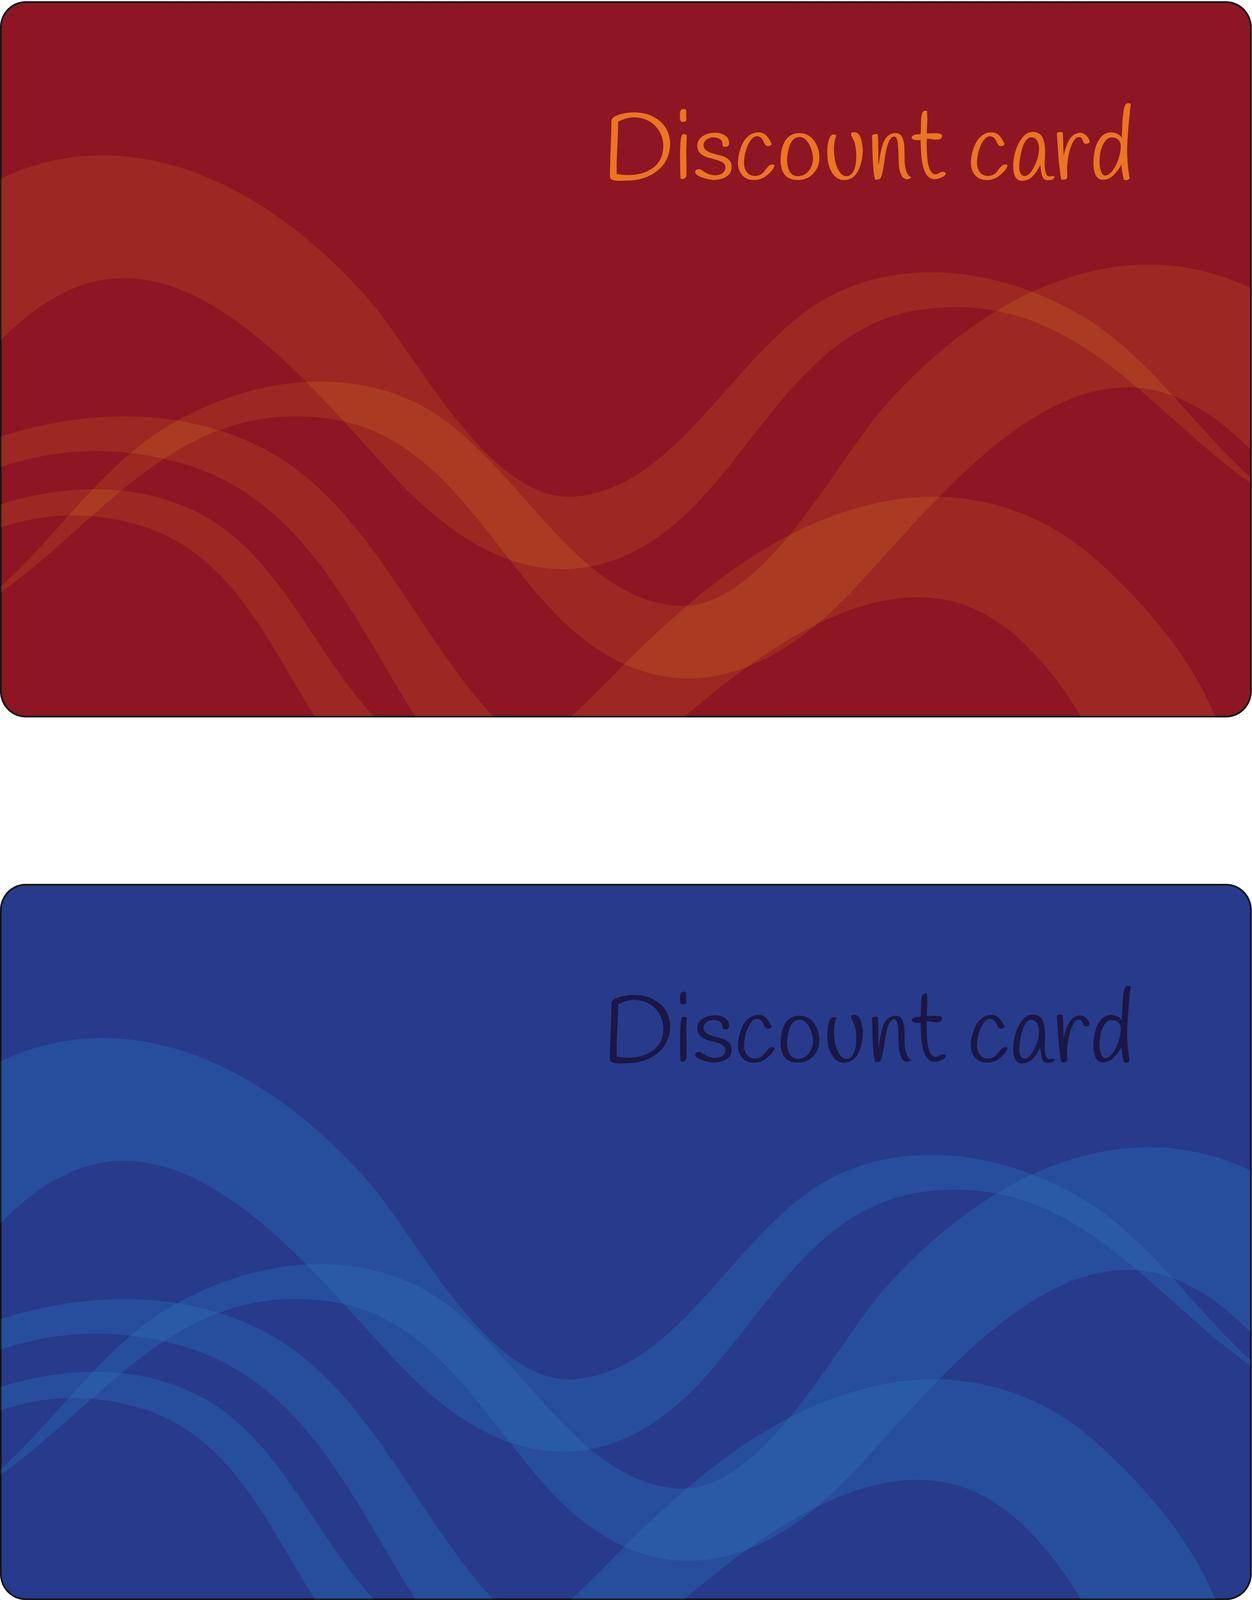 Classic discount cards. by Minur